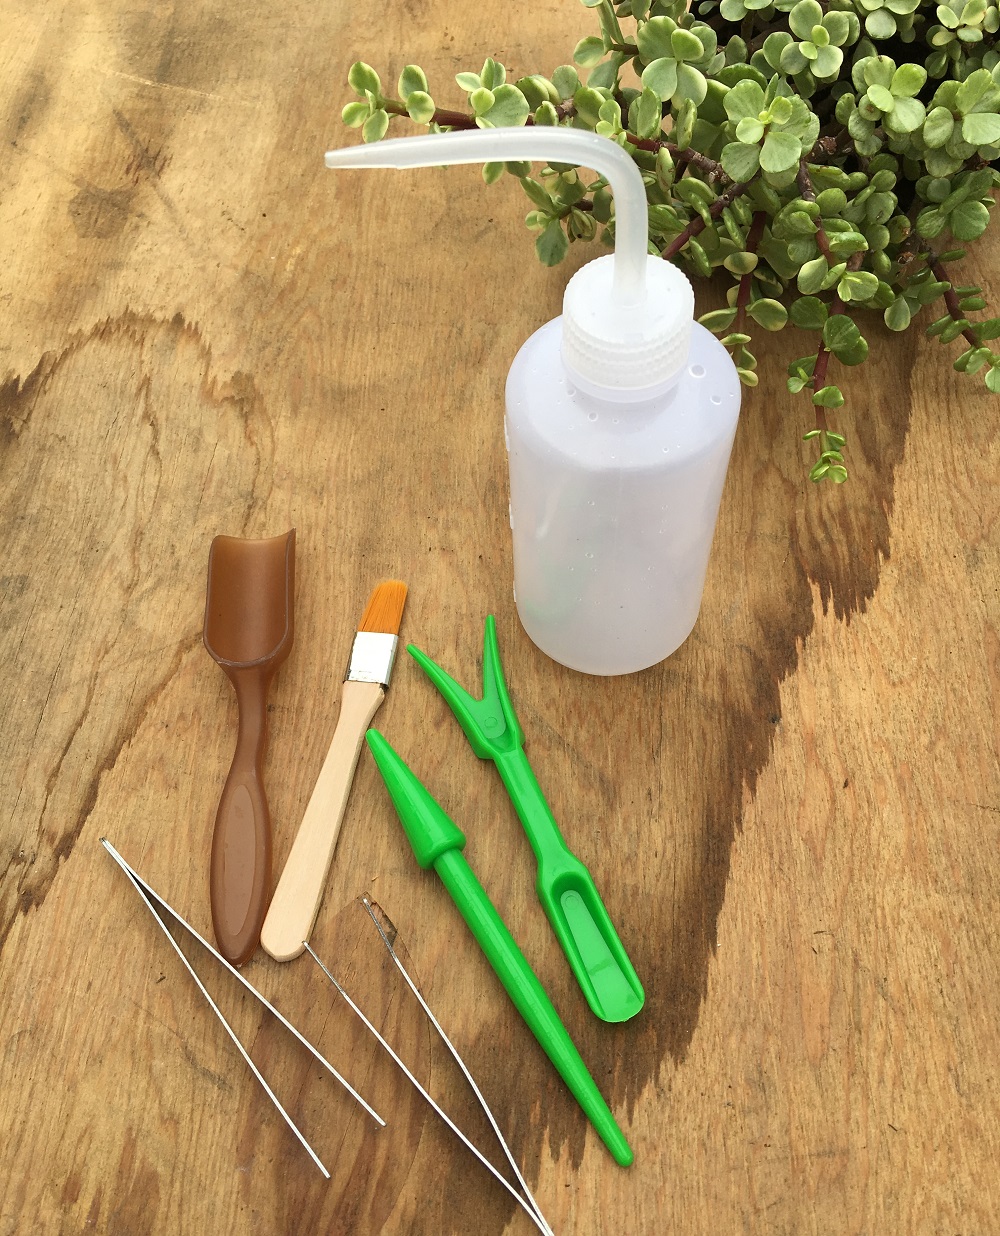 succulent tools are a great succulent gardening gift